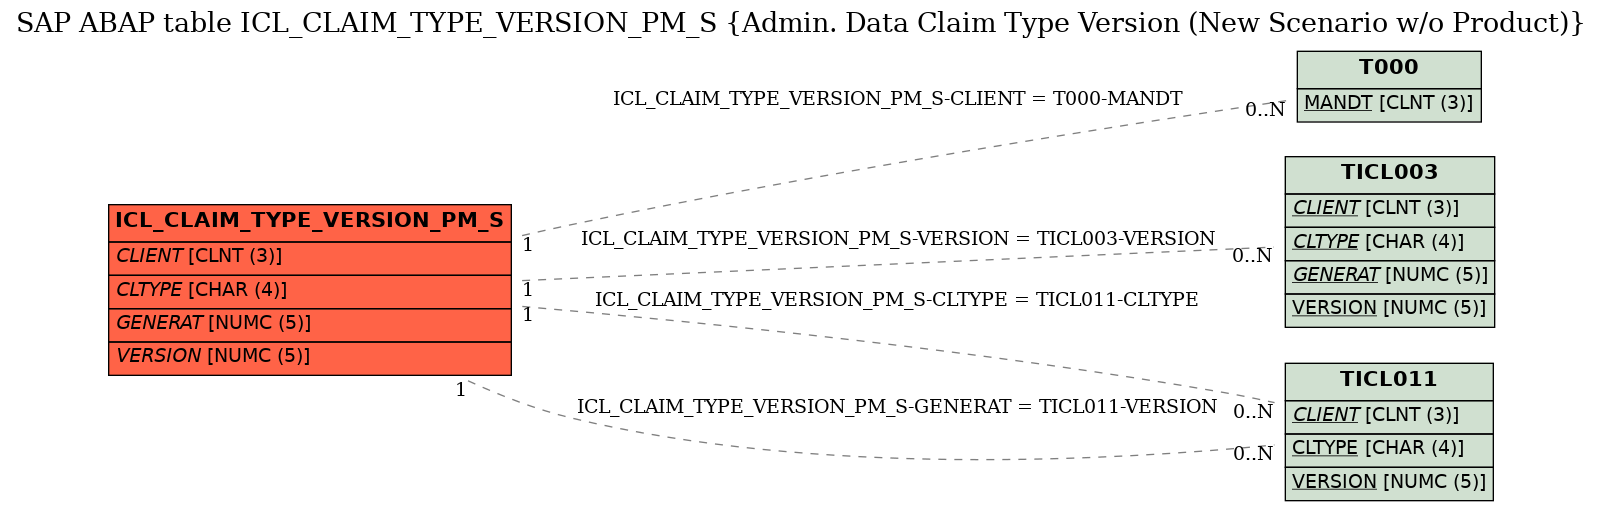 E-R Diagram for table ICL_CLAIM_TYPE_VERSION_PM_S (Admin. Data Claim Type Version (New Scenario w/o Product))